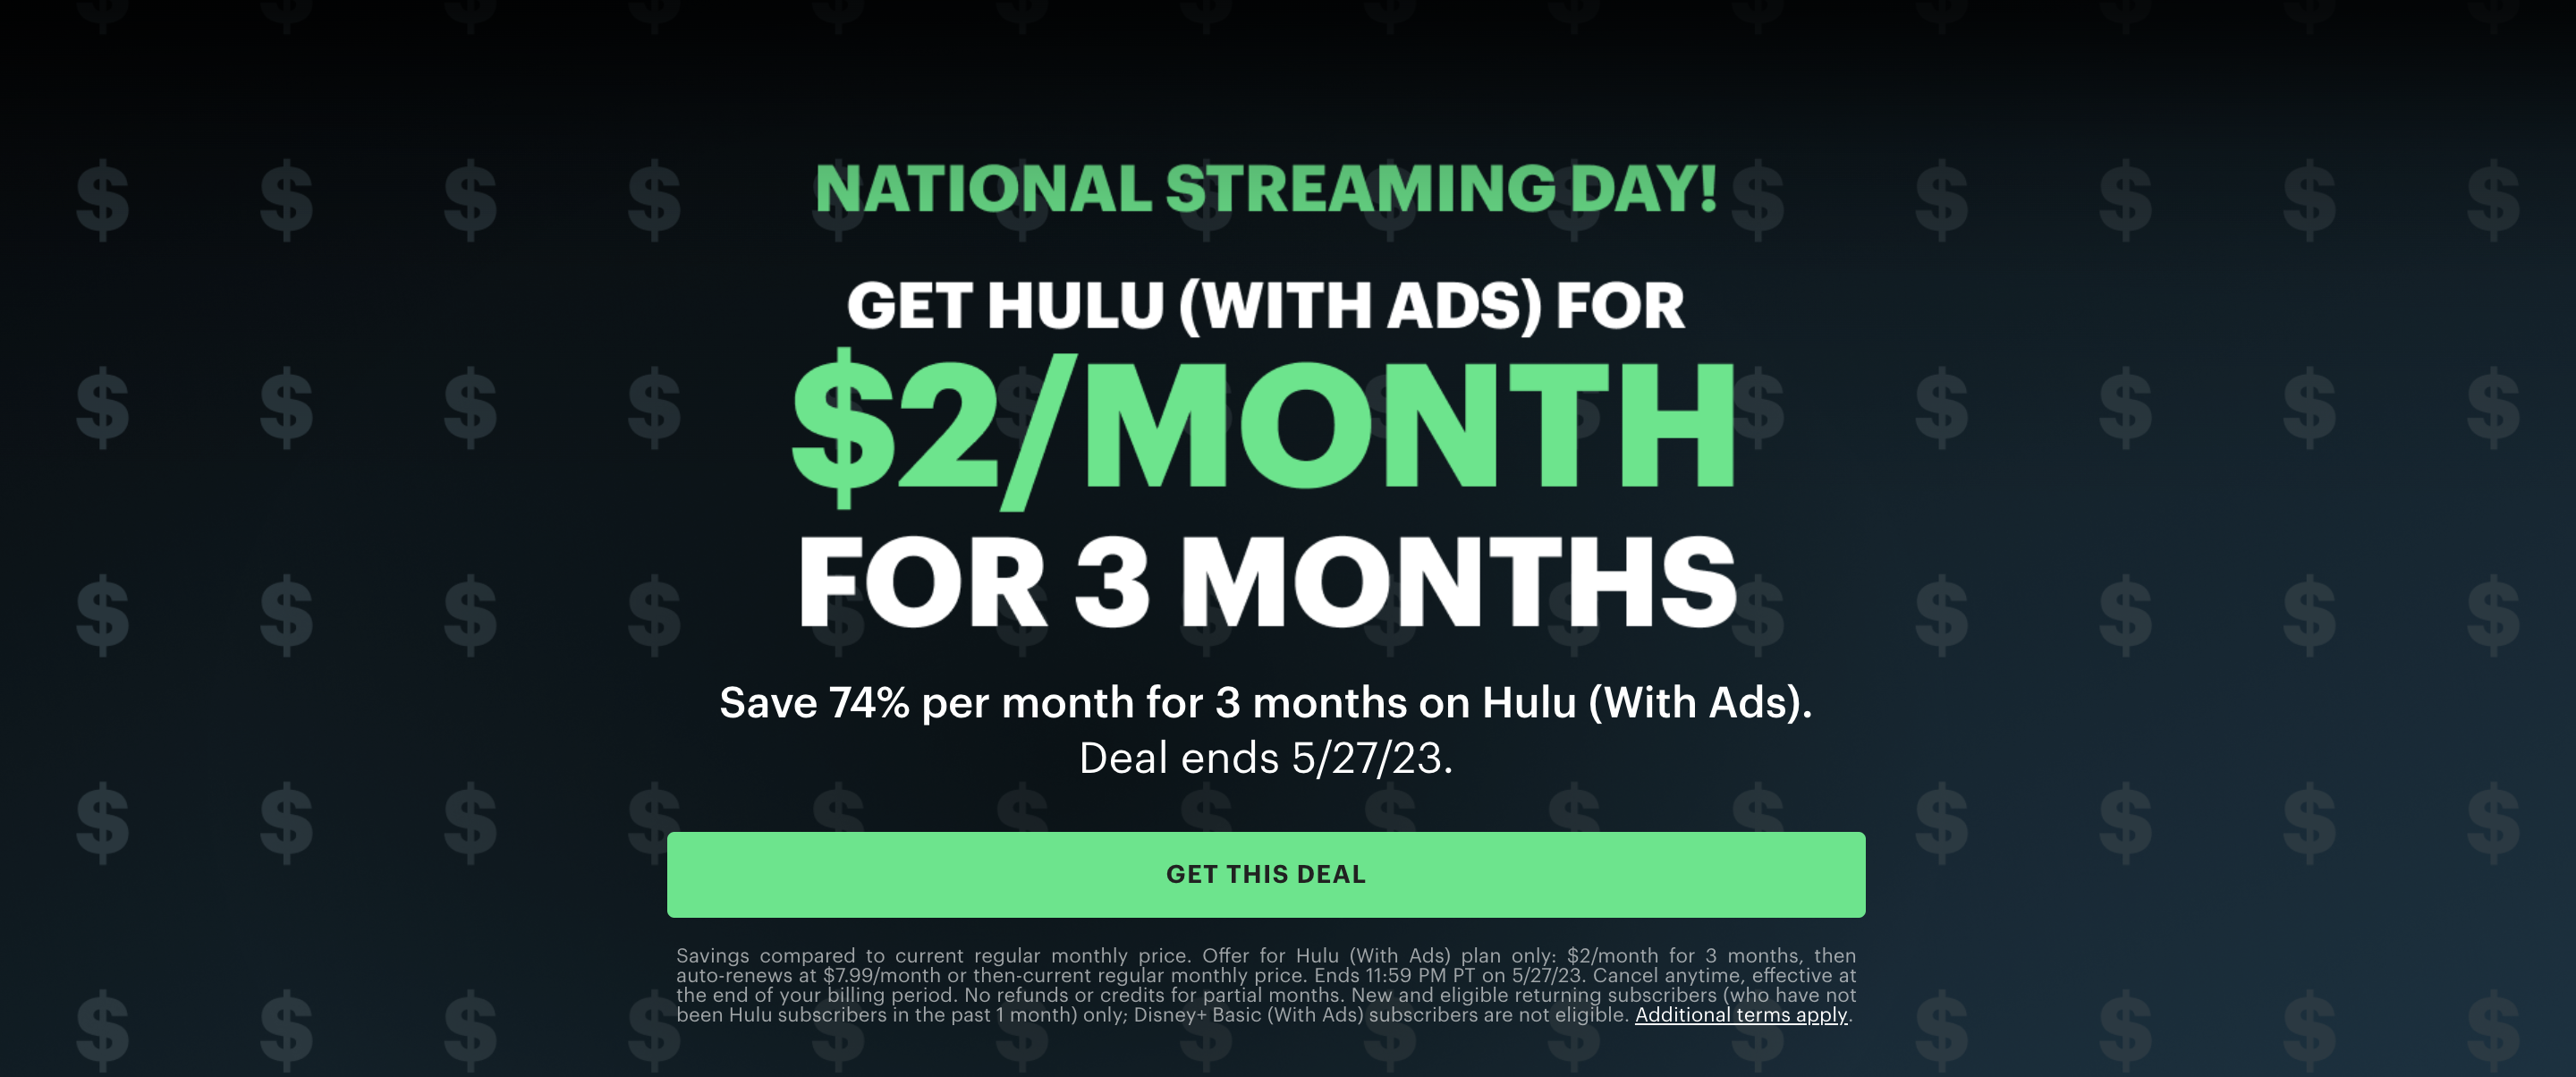 Save on a Hulu Subscription with This Streaming Day Deal